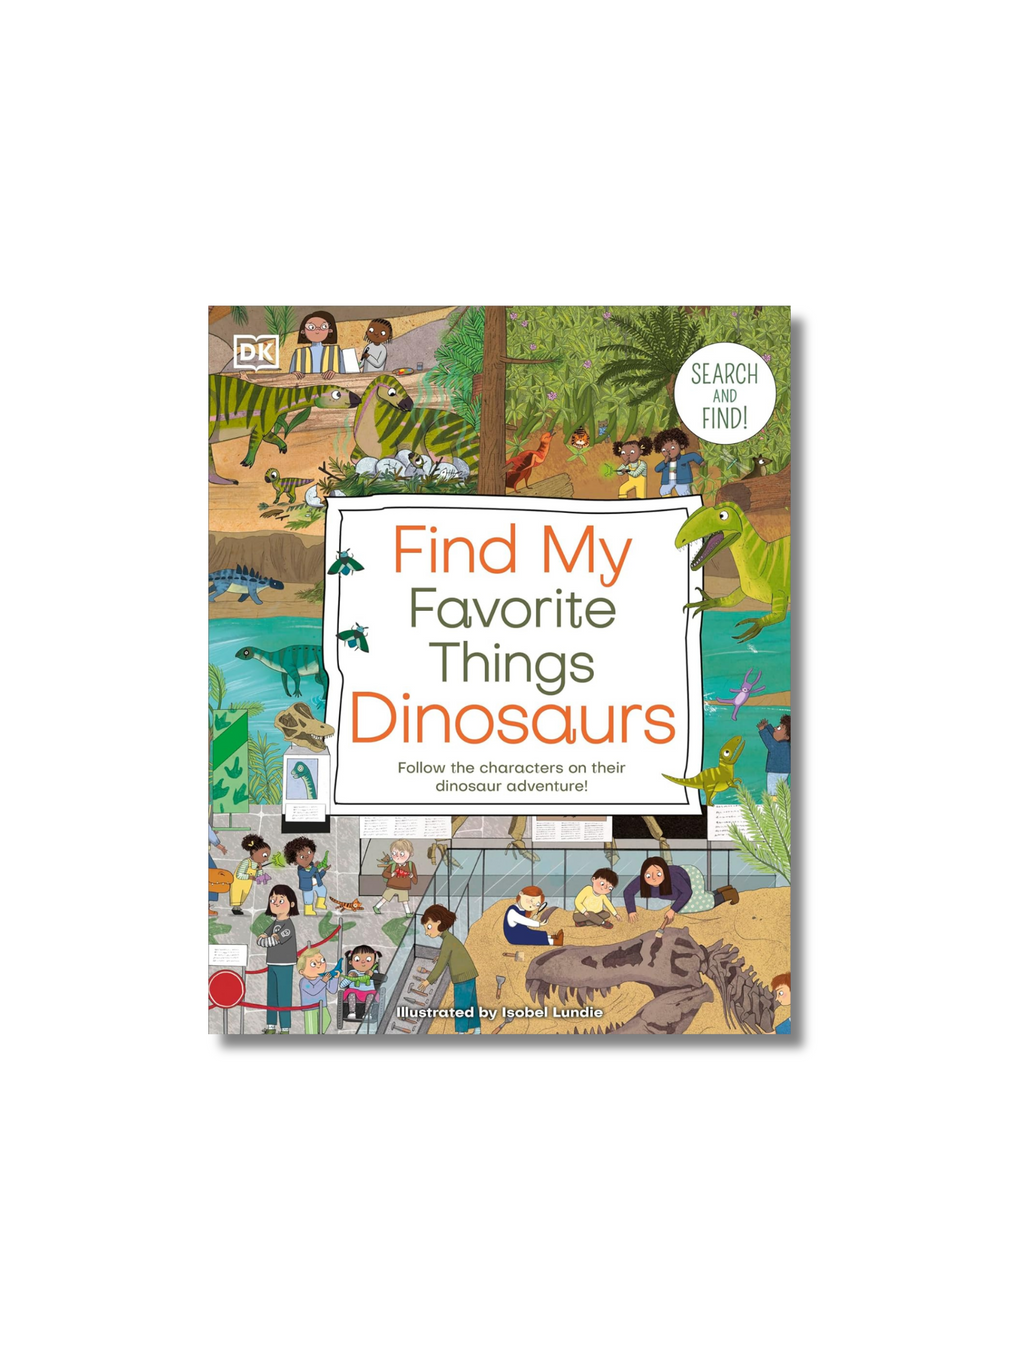 Find My Favourite Things Dinosaurs: Search and Find!